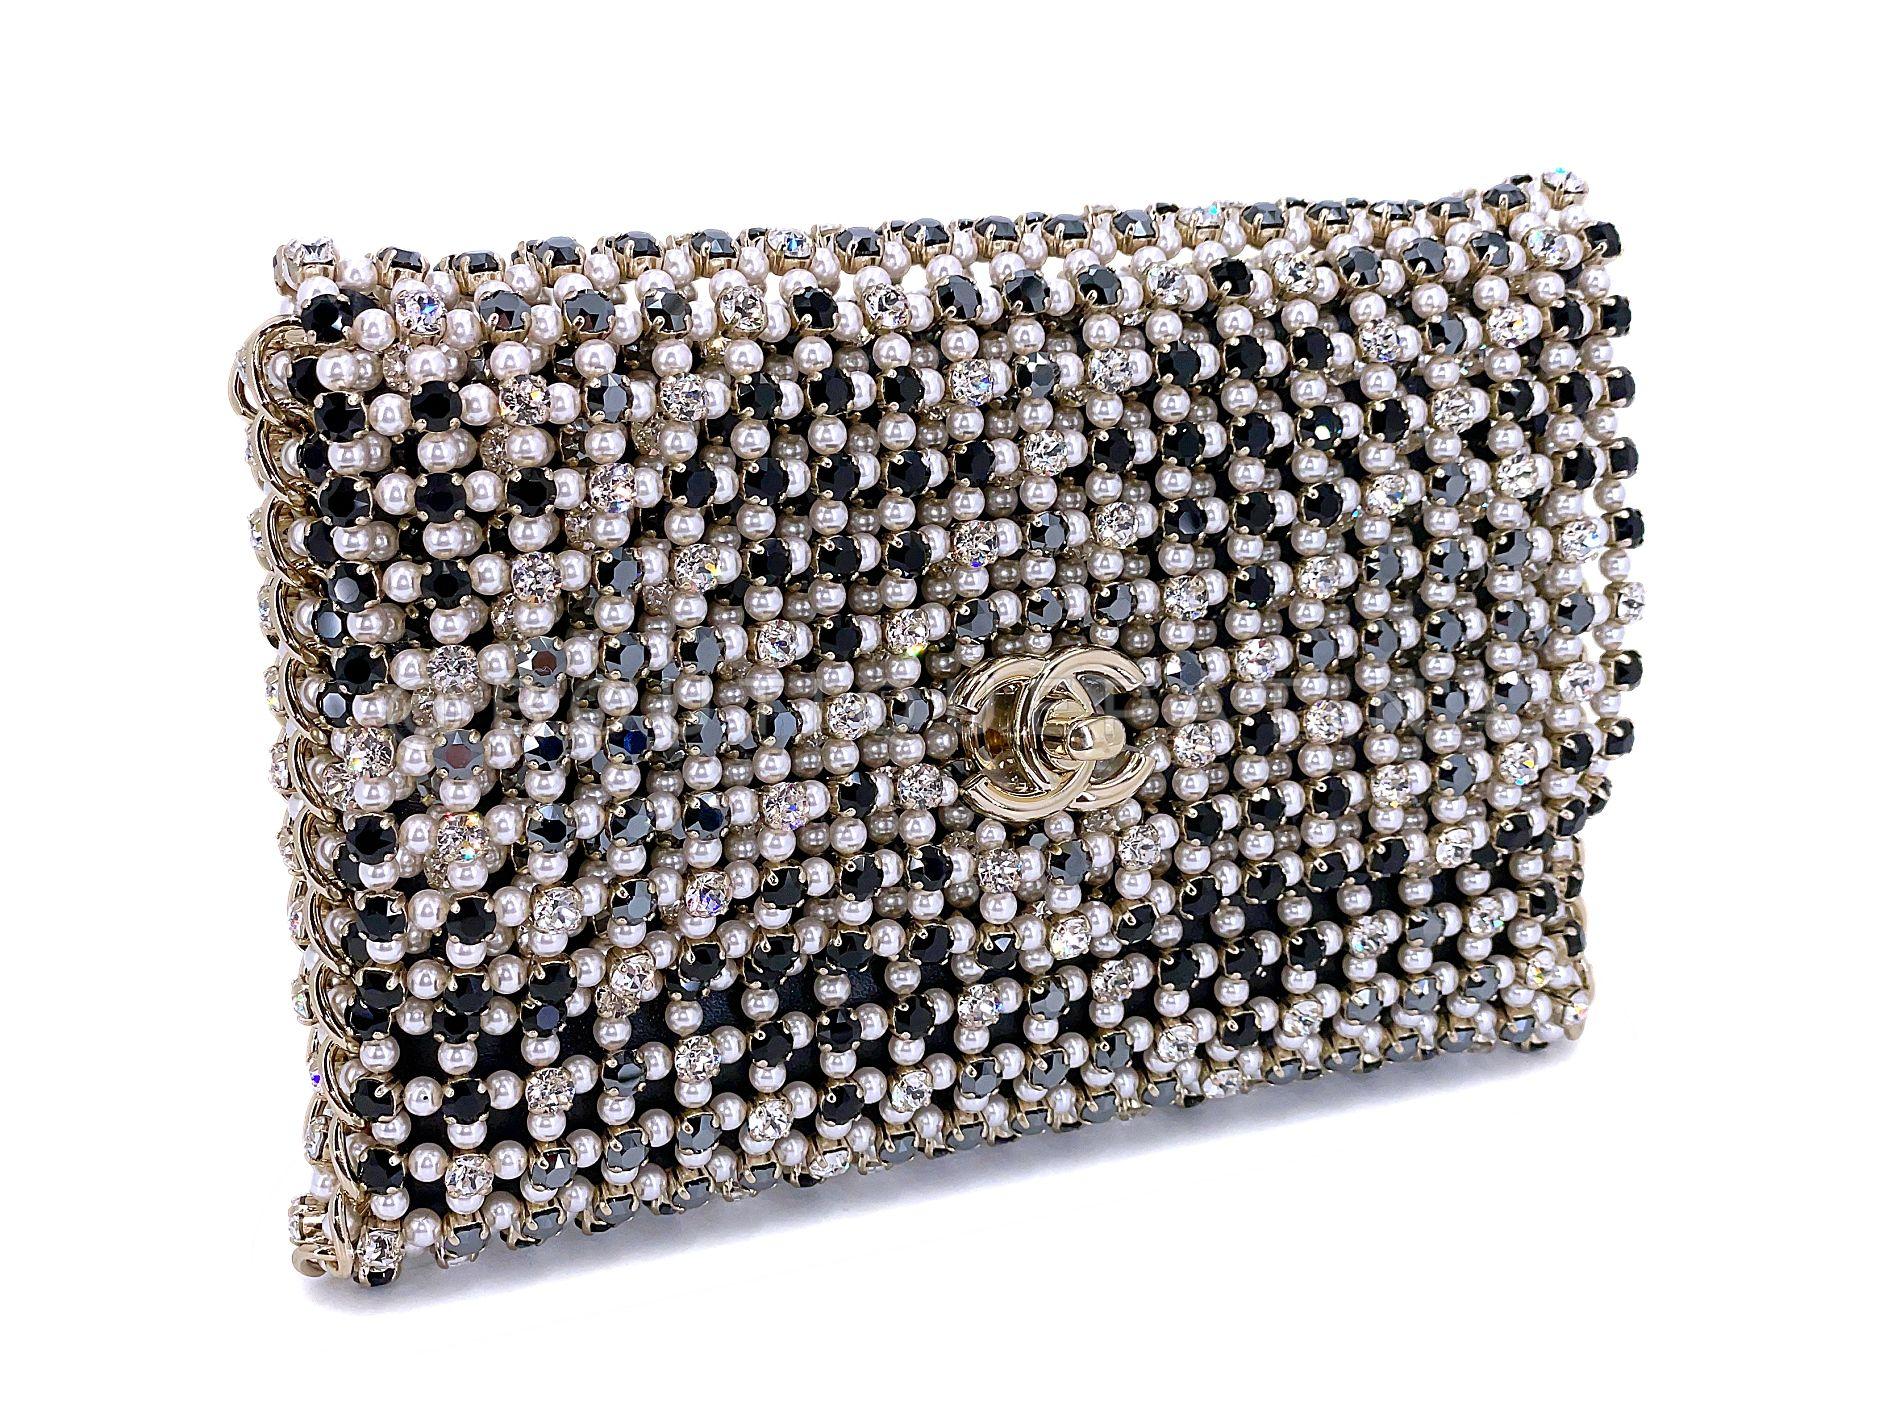 Chanel 2021 Evening Gold Pearls Crystal Flap Bag 67895 In Excellent Condition For Sale In Costa Mesa, CA